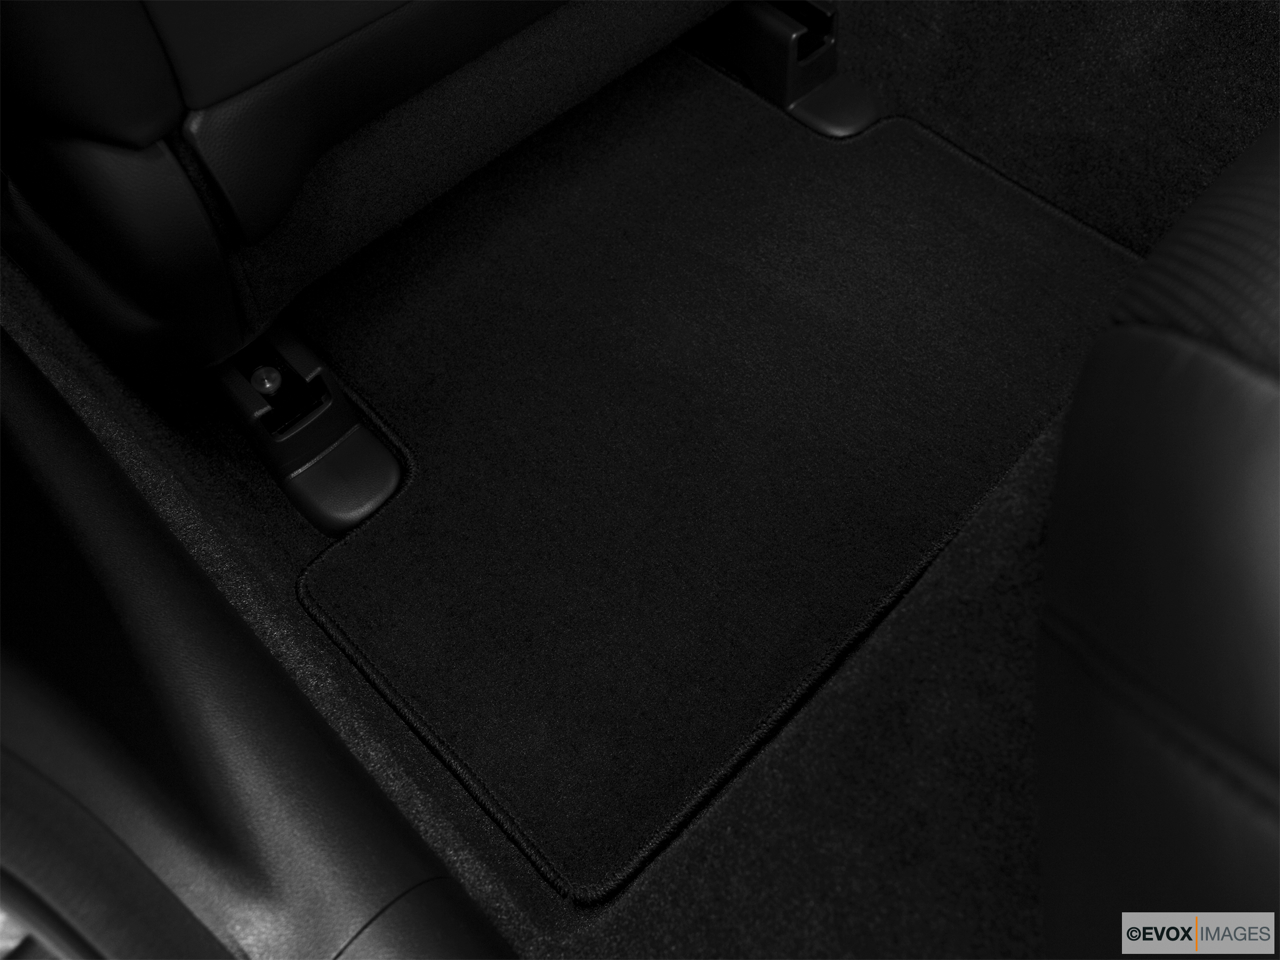 2010 Acura TSX V6 Rear driver's side floor mat. Mid-seat level from outside looking in. 